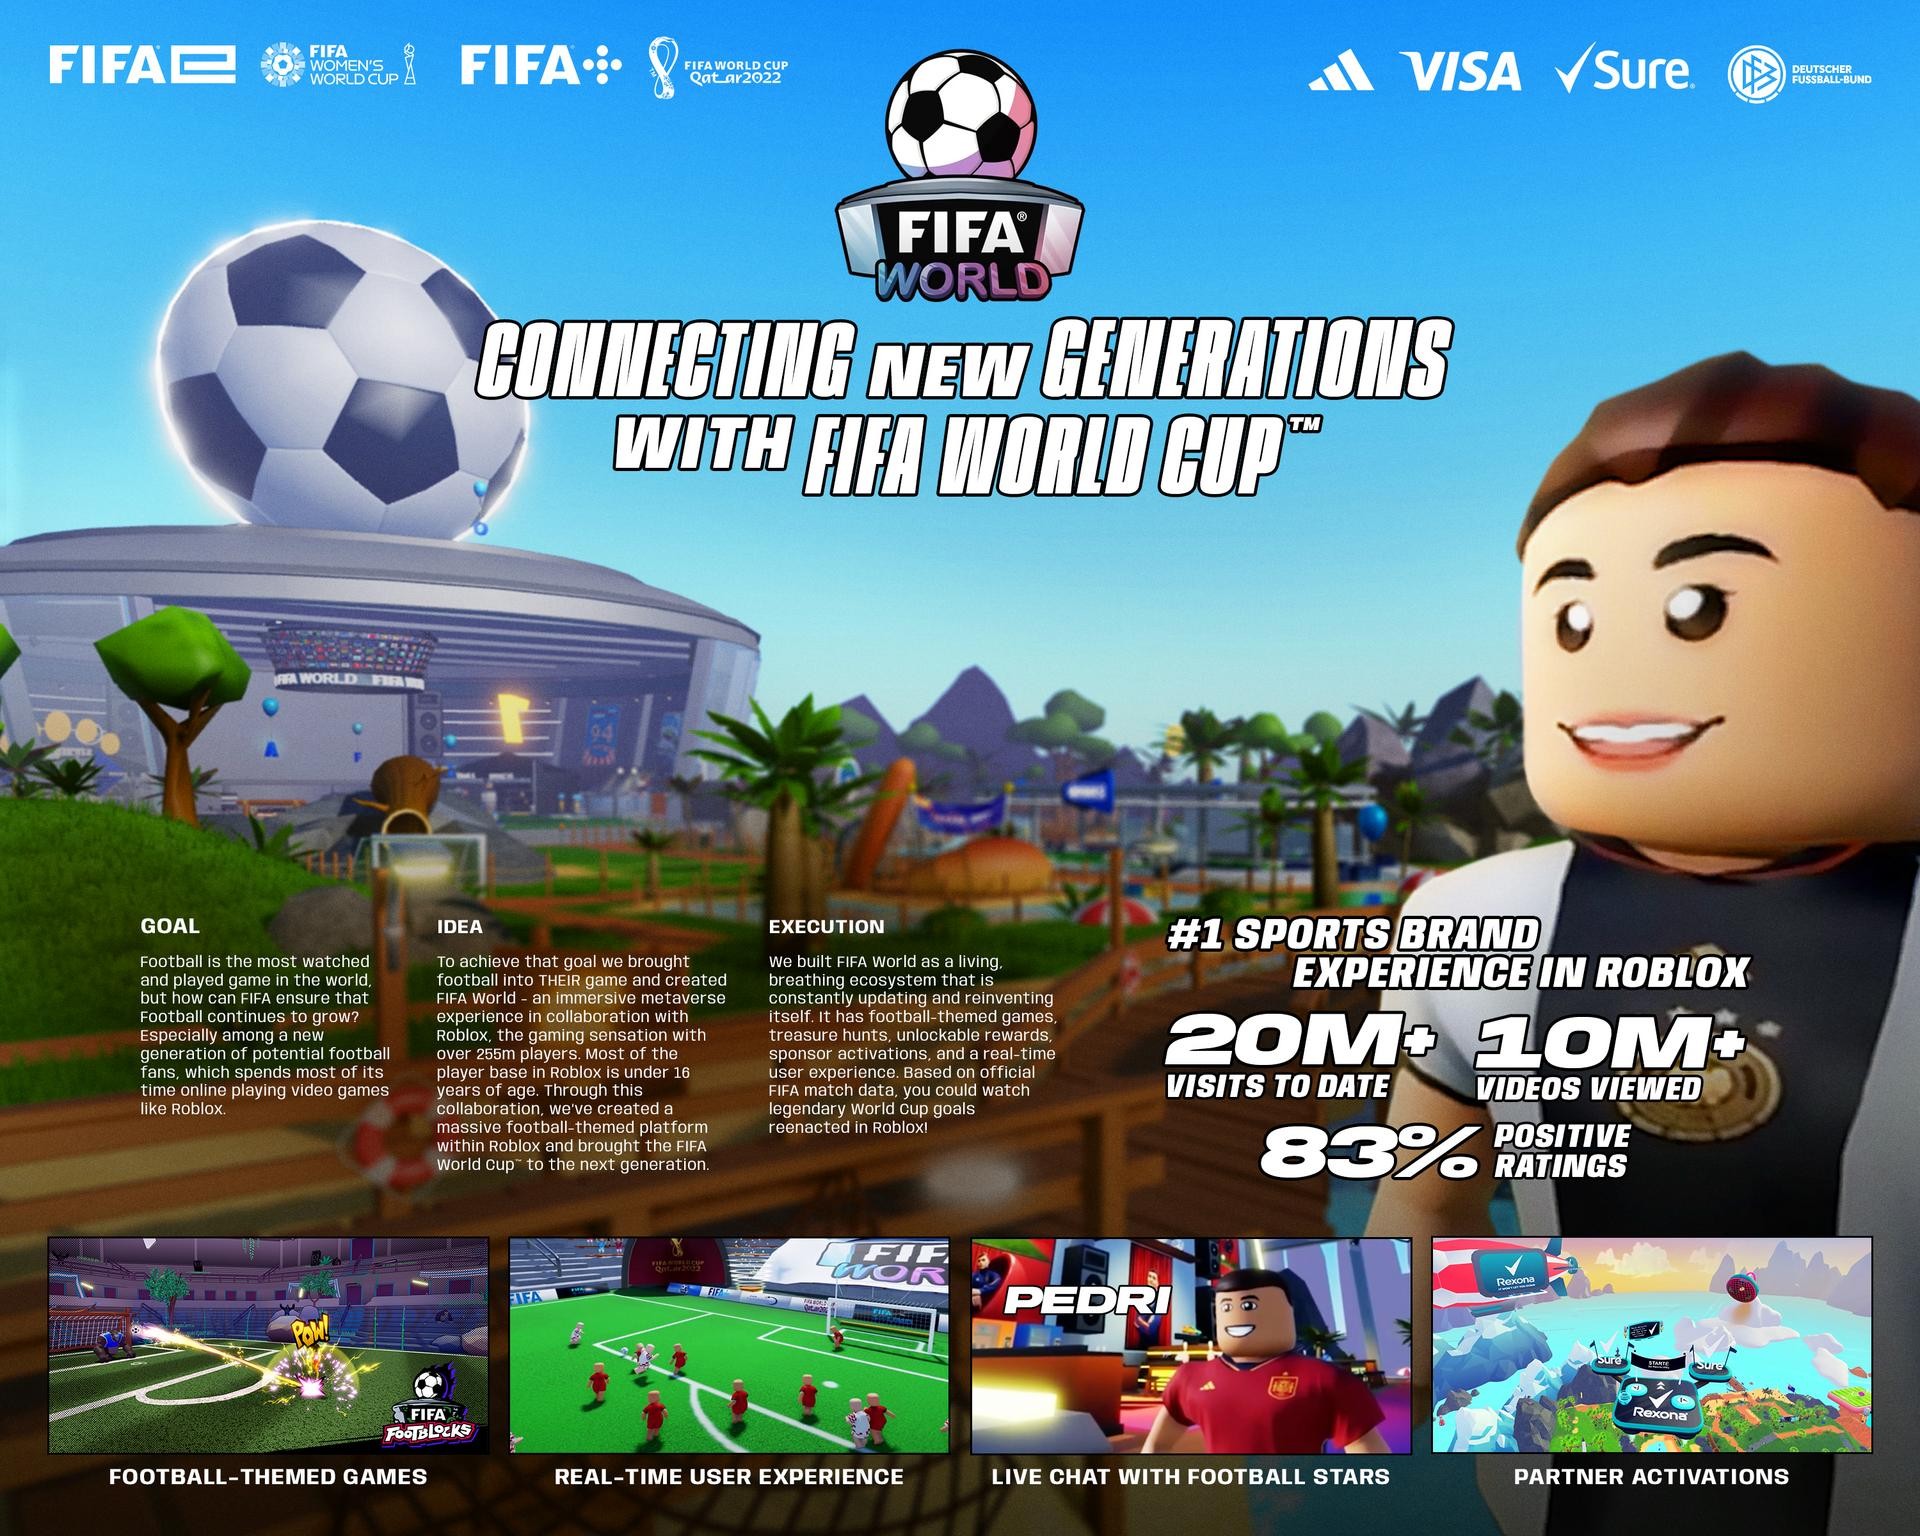 FIFA World in Roblox - Connecting New Generations with FIFA World Cup™